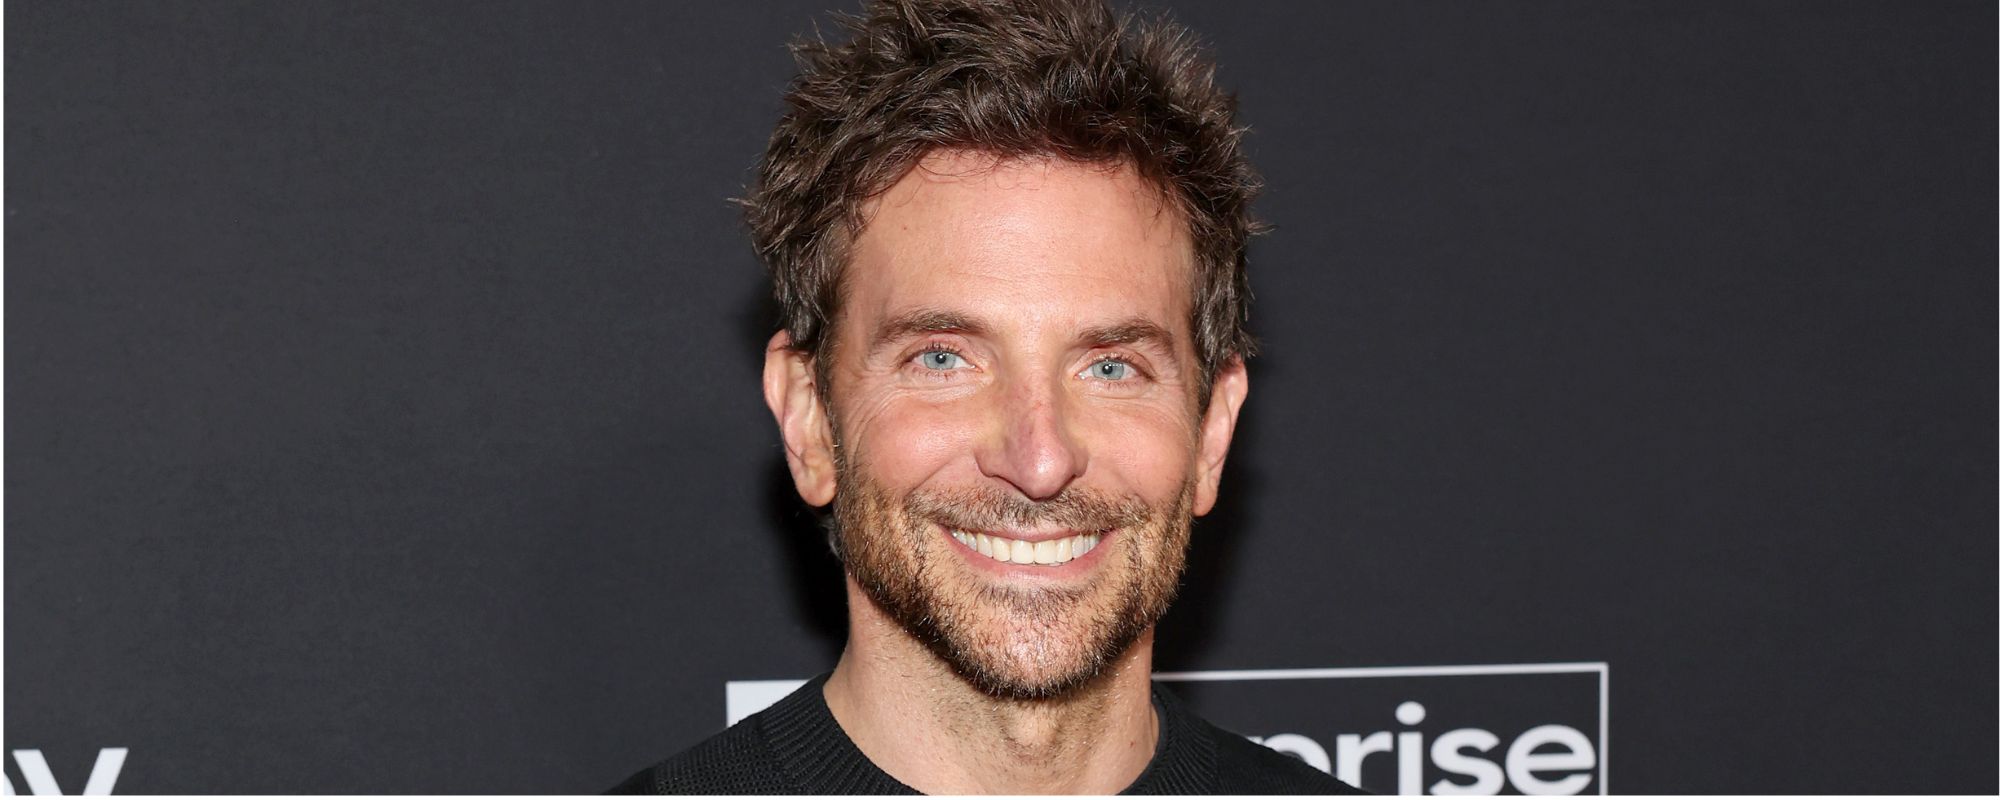 3 Songs You Didn’t Know Bradley Cooper Wrote